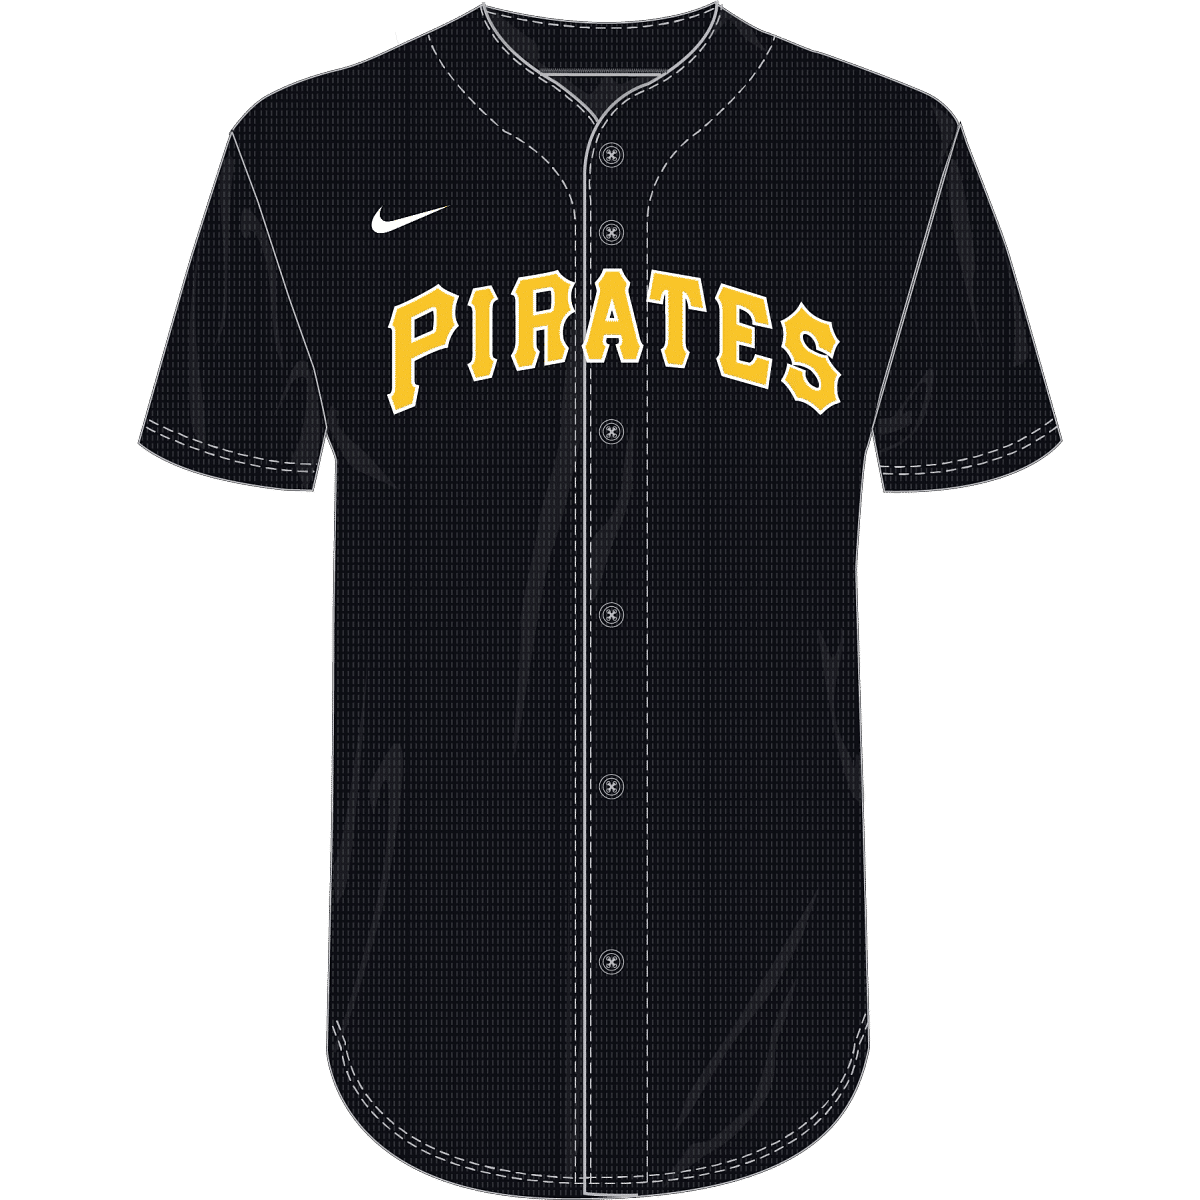 E170792 Nike MLB Adult/Youth Dri-Fit Full Button Jersey N140 / NY40 ...